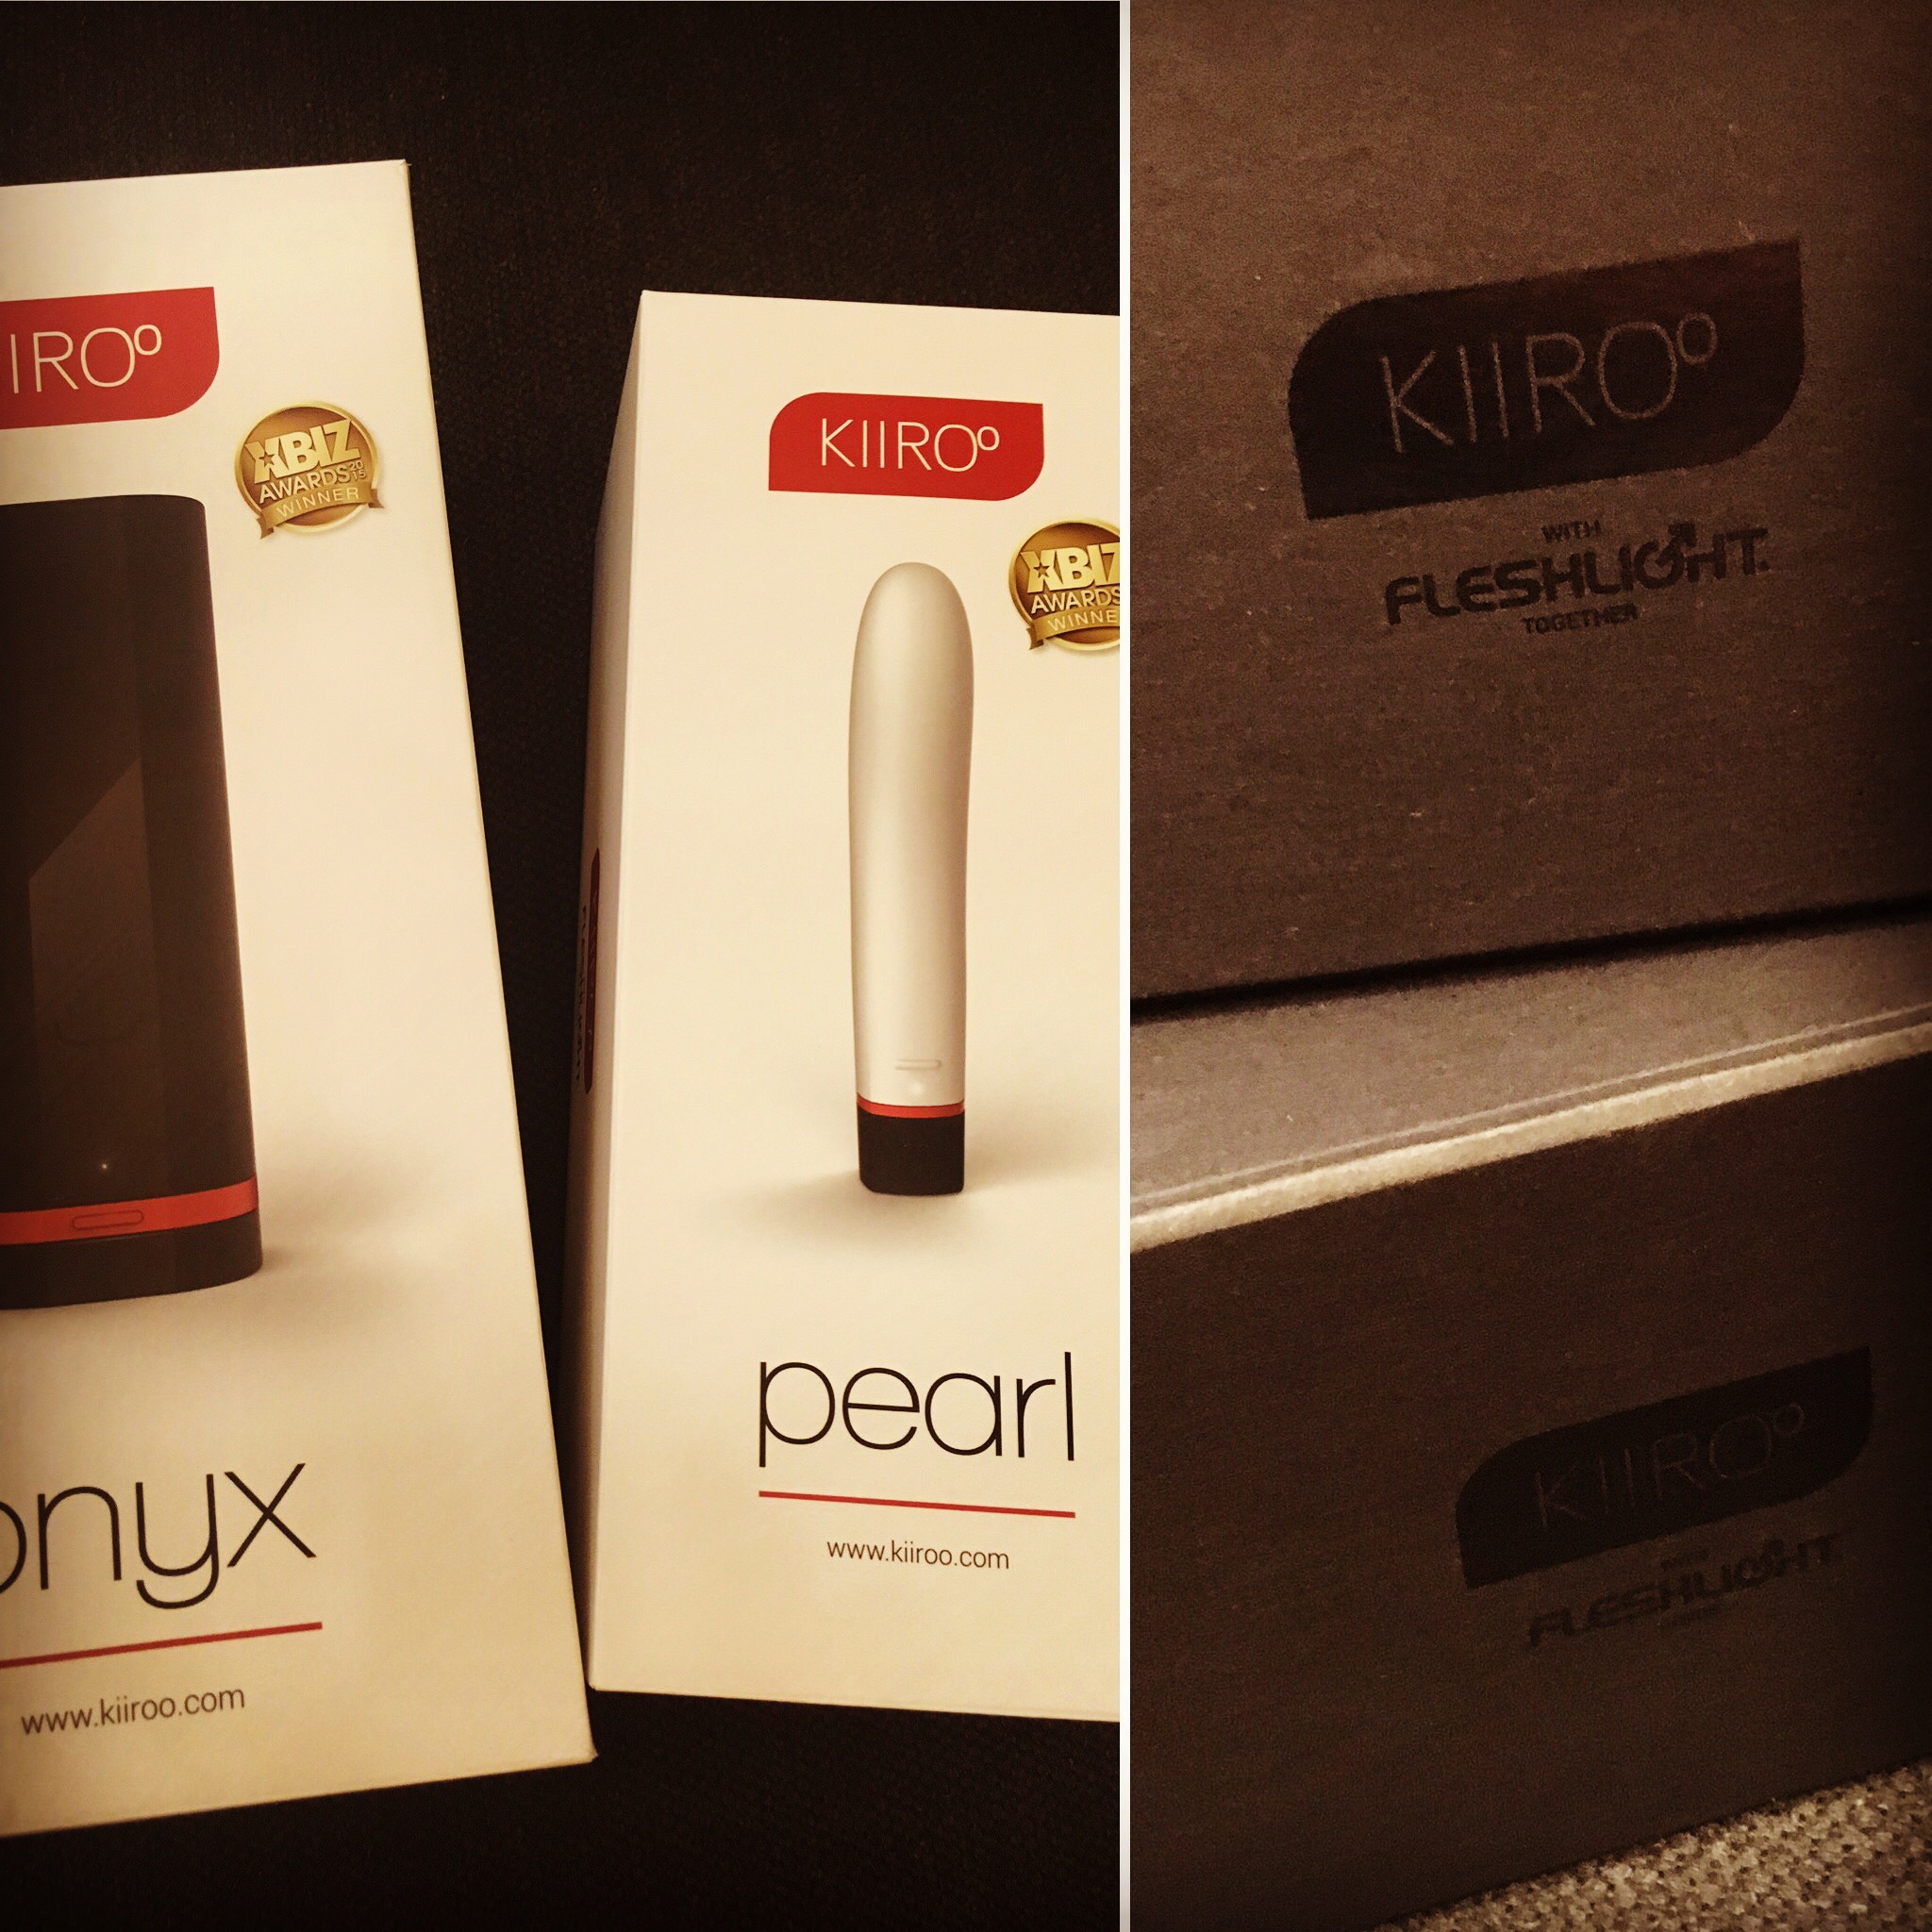 Kiiroo Review: Is It Really Worth the Money? Find Out Here.